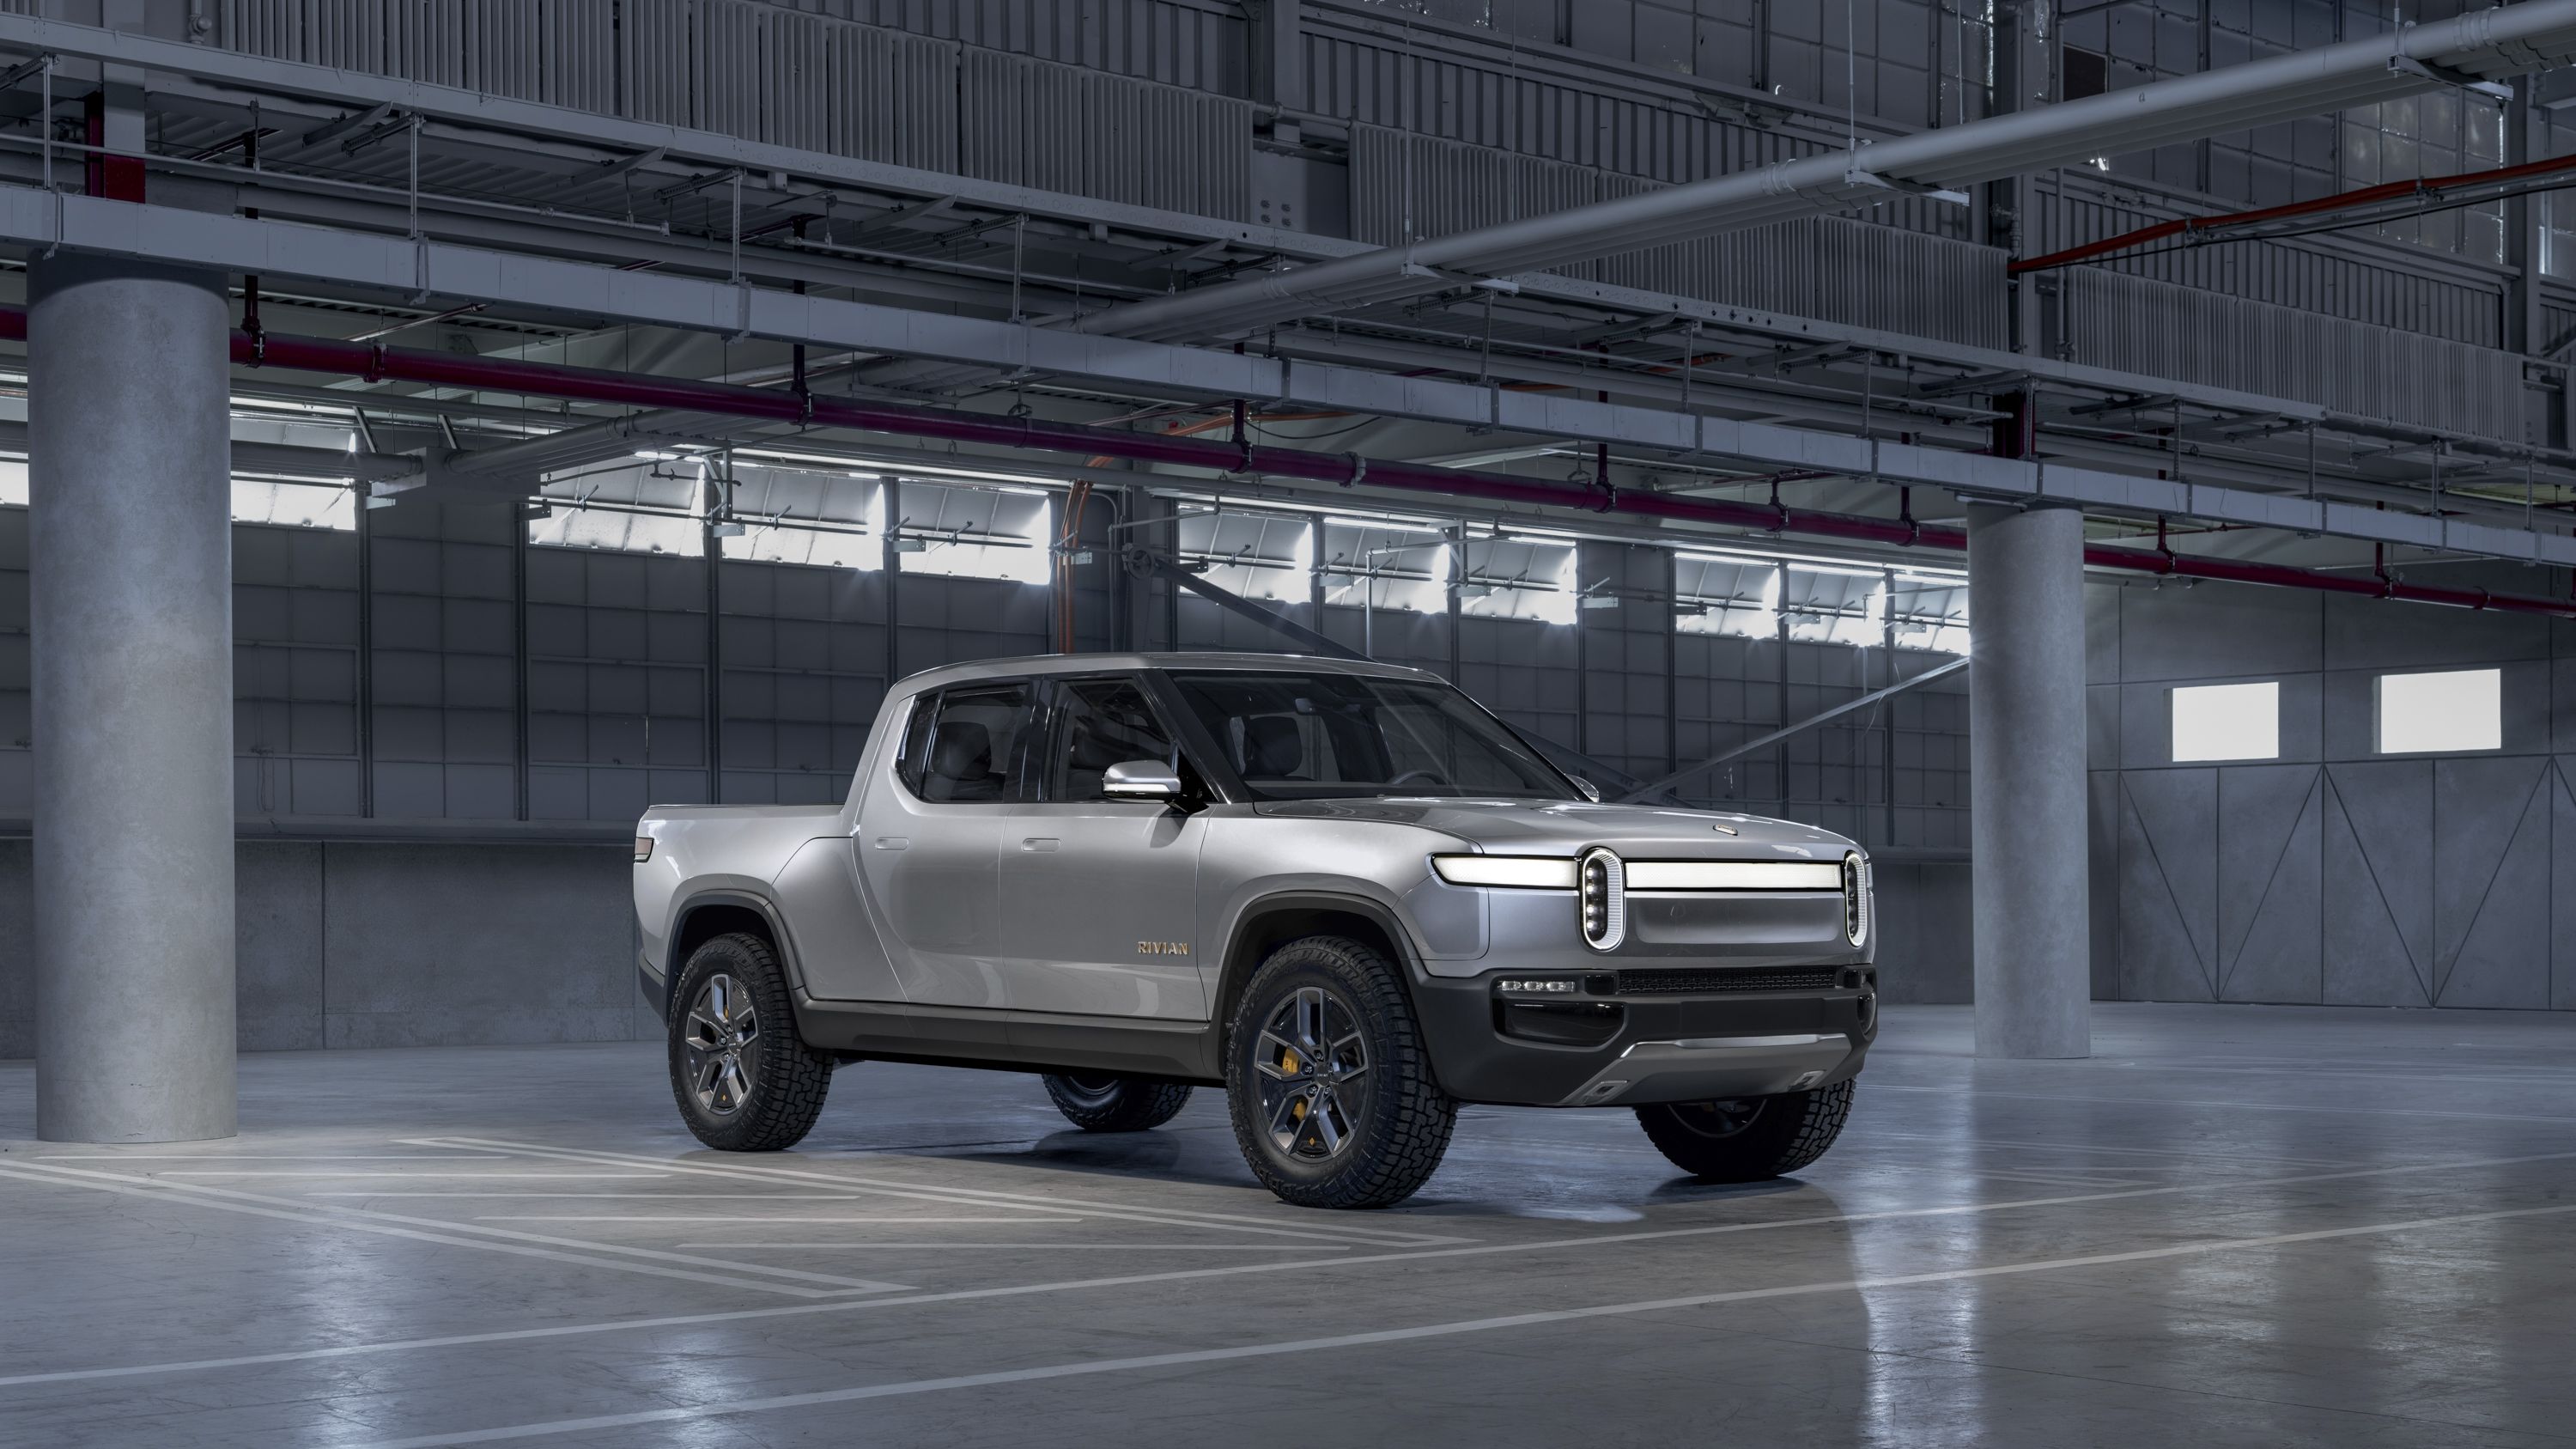 2020 Rivian R1T parked